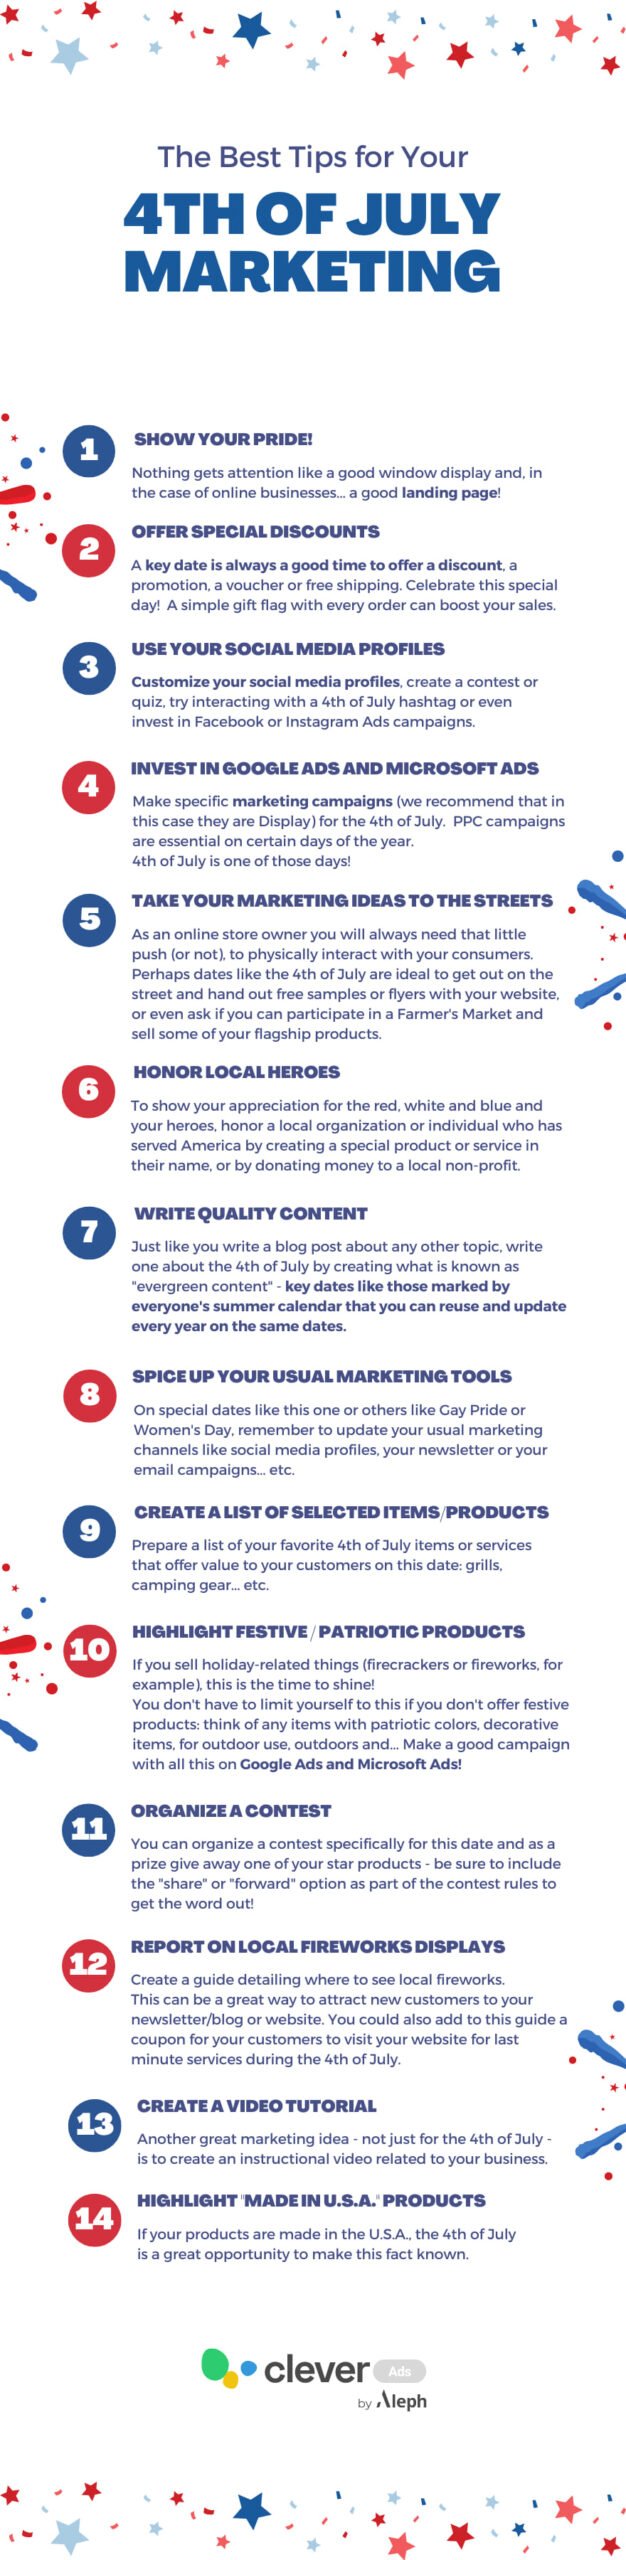 4th of july marketing infographic